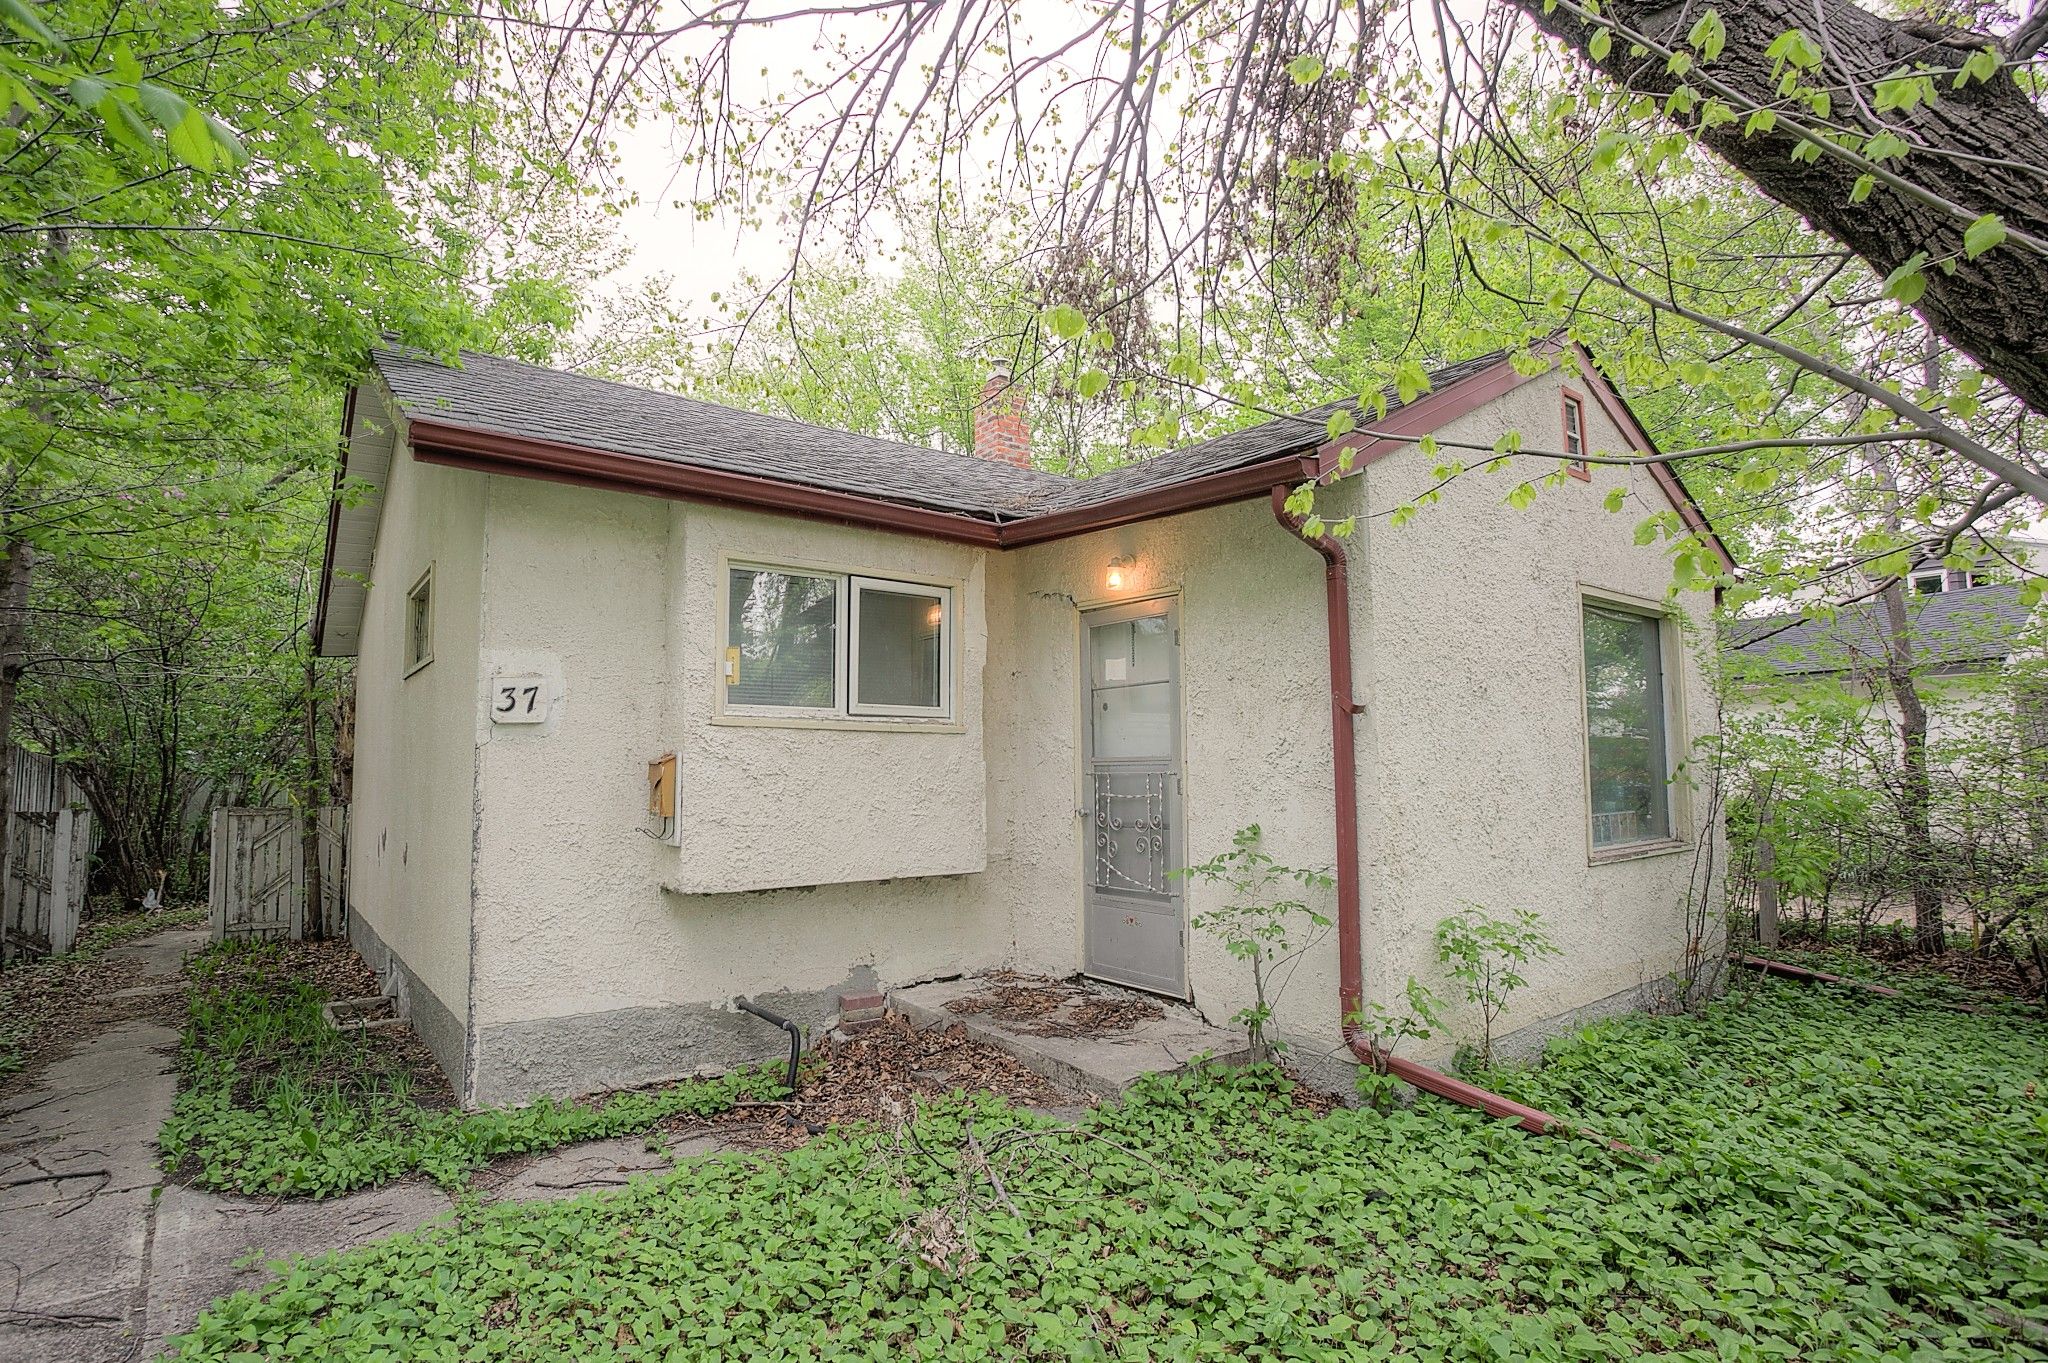 I have sold a property at 37 St George RD in Winnipeg
